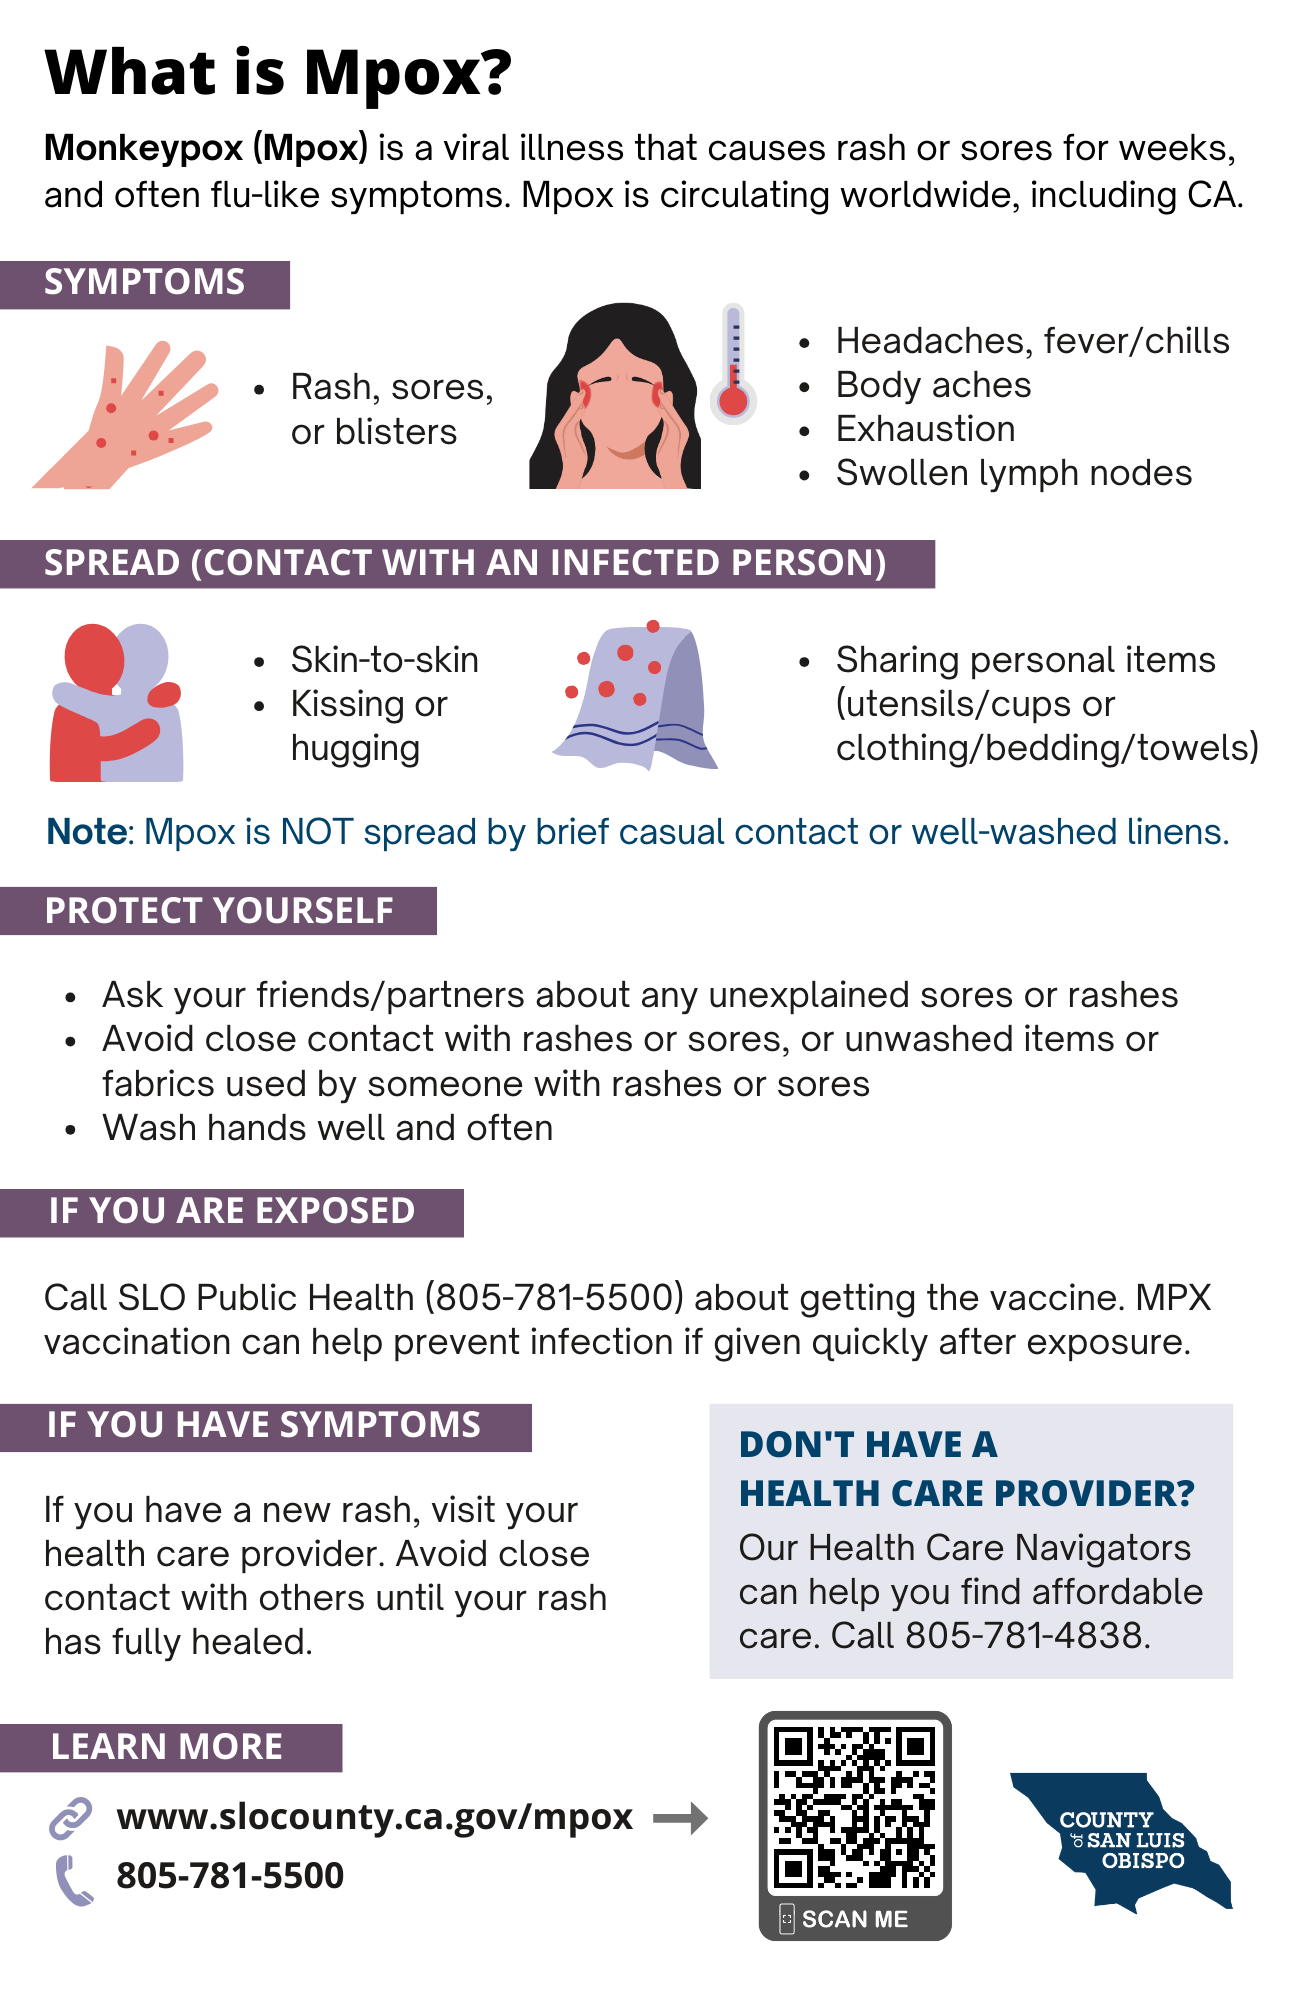 A flyer with a white background and images explaining the symptoms, prevention and spread of mpox.